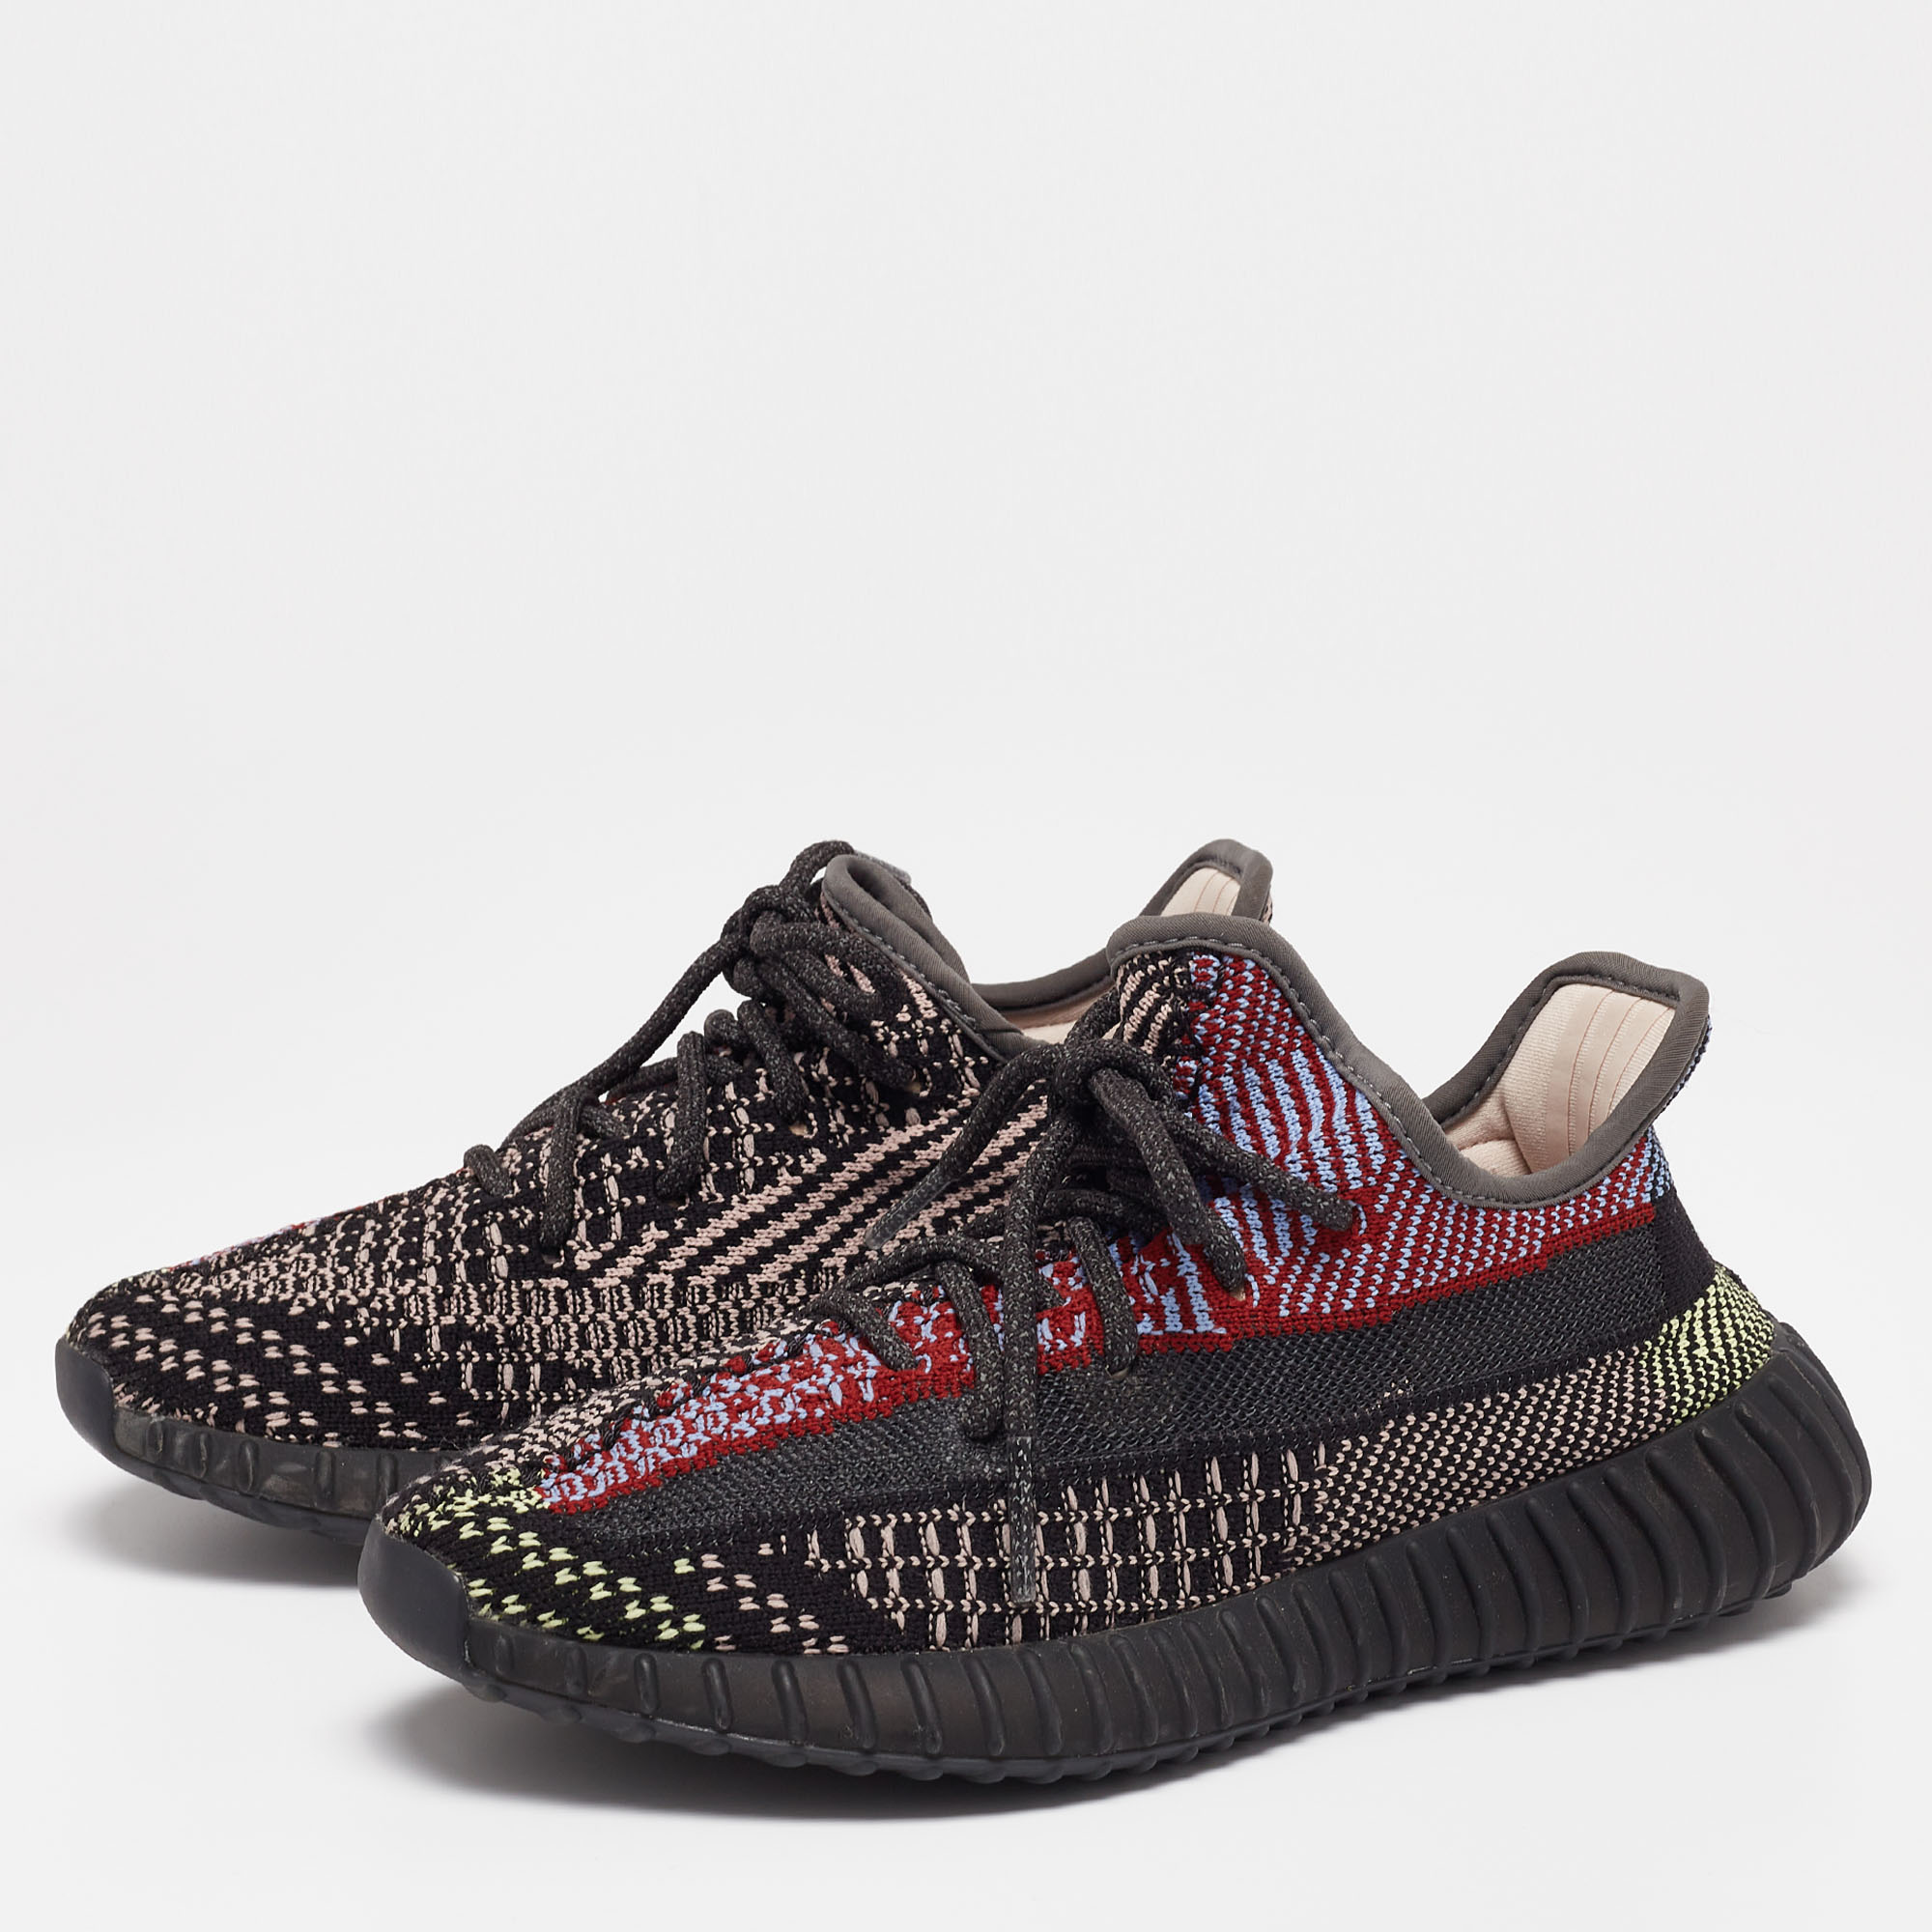 

Adidas Yeezy Boost Multicolor Knit Fabric And Mesh 350 V2 Yecheil (Non-Reflective) Sneakers Size 37 1/3